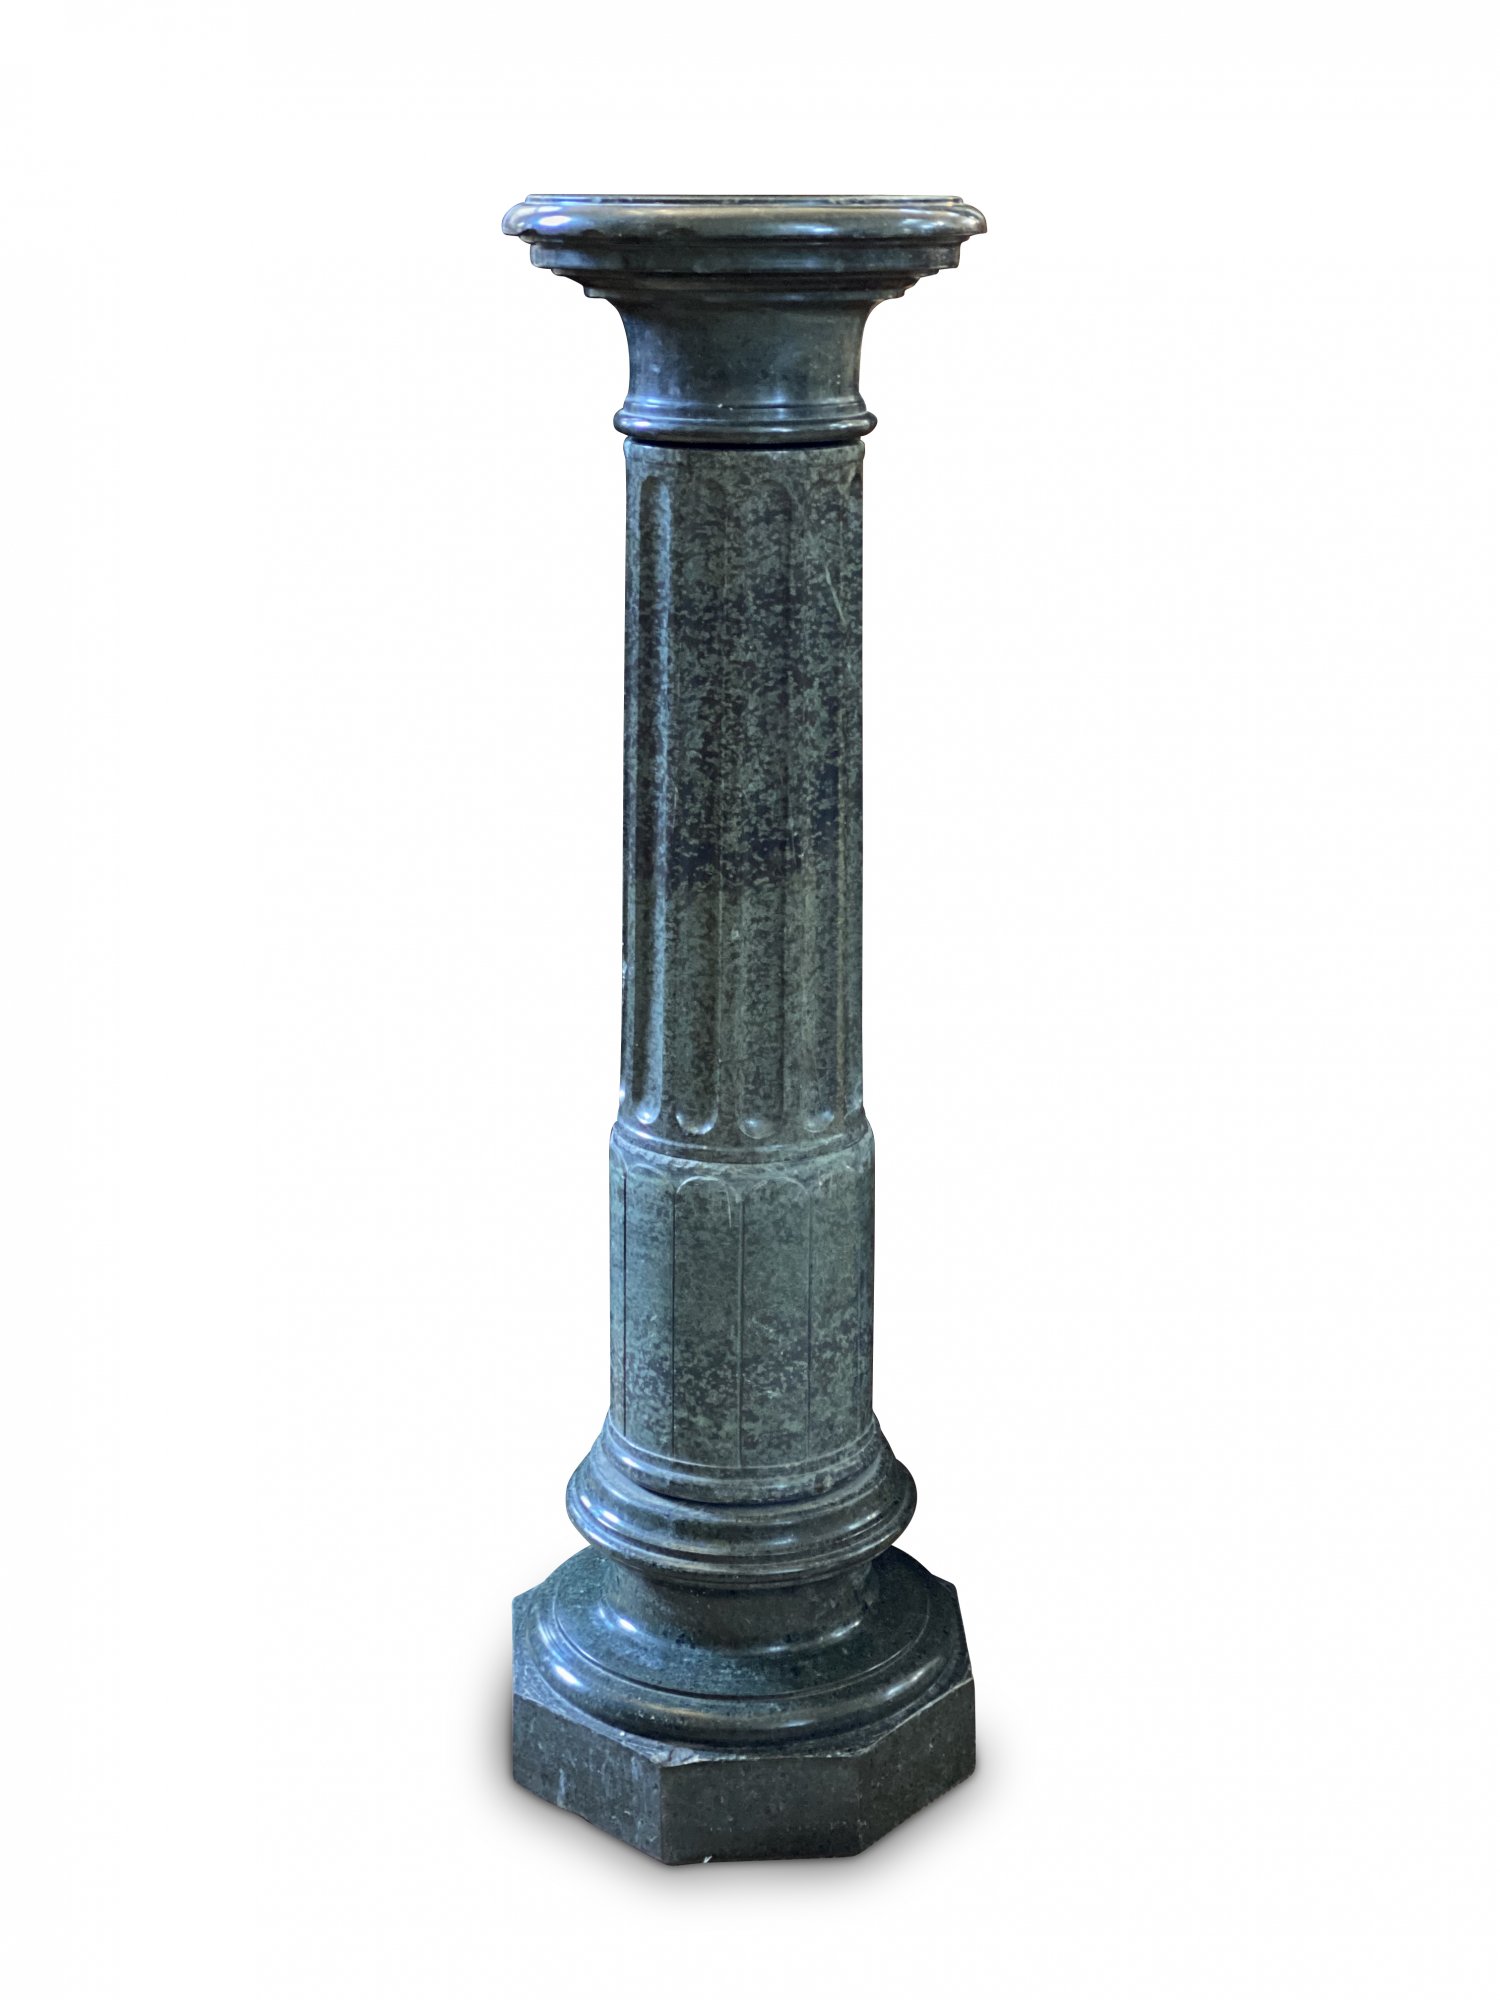 19th-century French green marble turned pedestal with fluted column